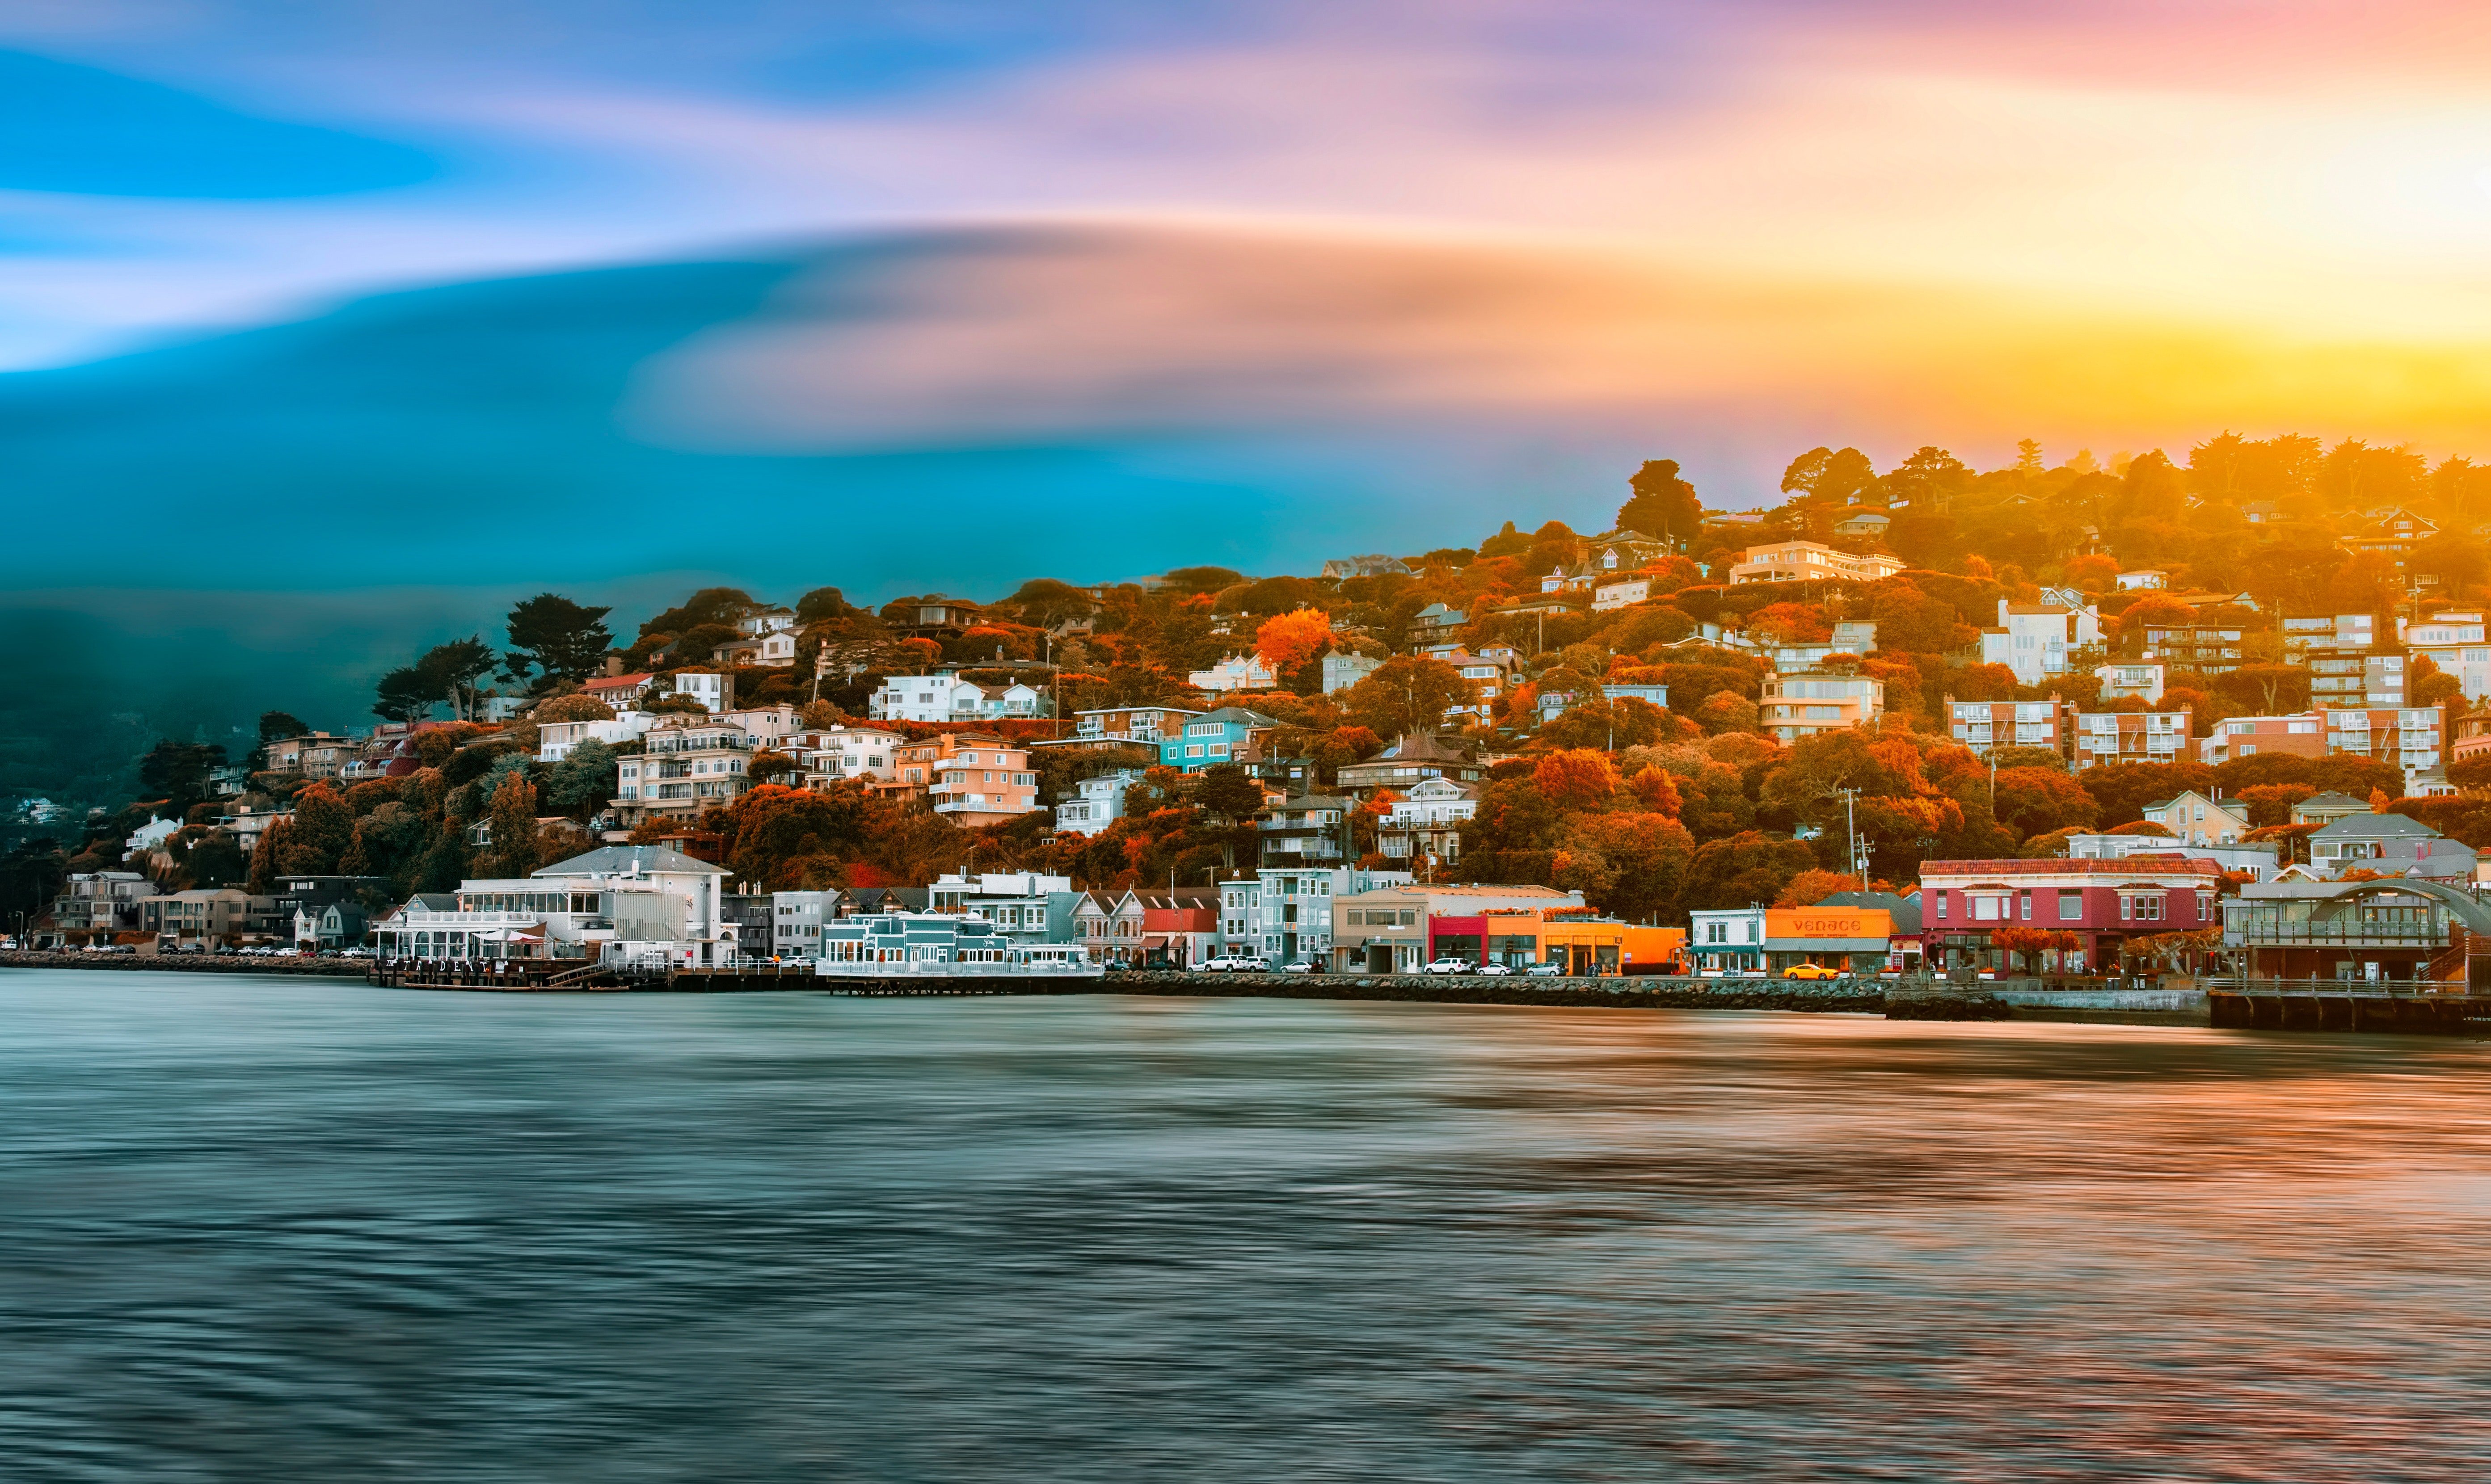 Barbara and Edward relocated to Sausalito when Madison was 6. | Source: Pexels